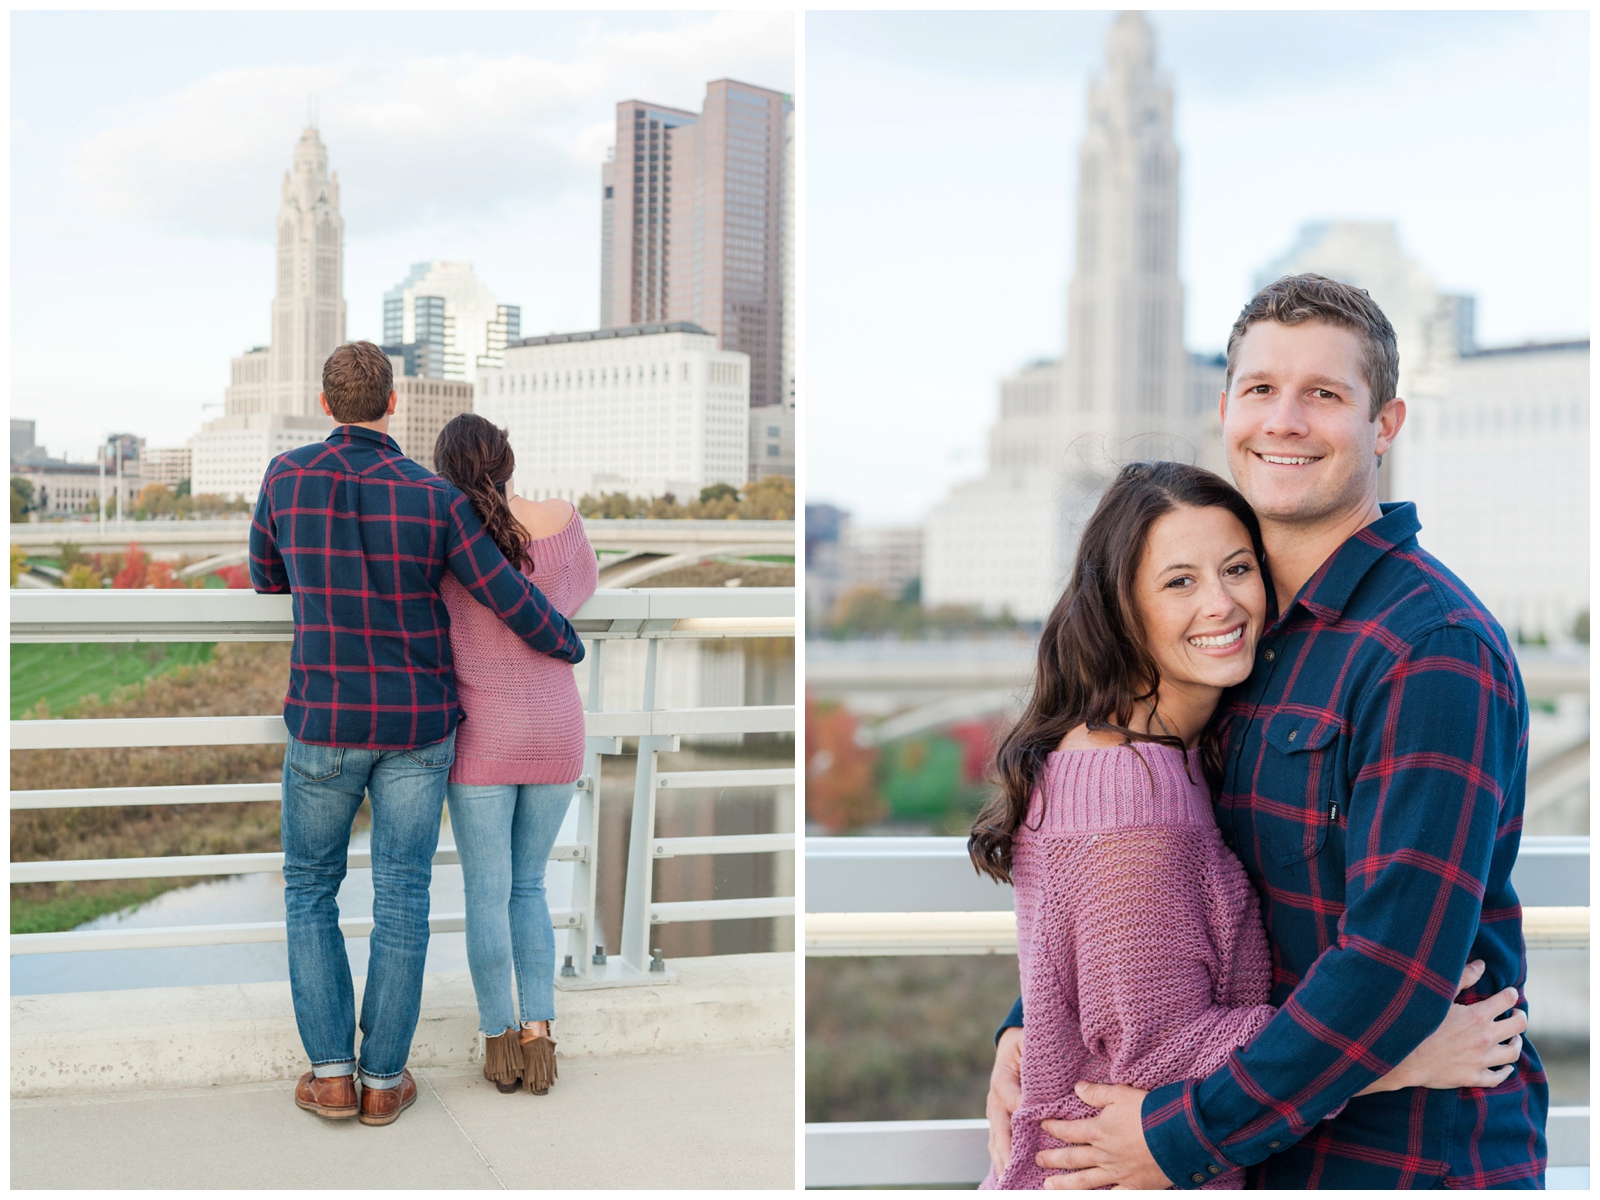 downtown columbus ohio engagement session scioto mile and genoa park in early november. fall engagement session with columbus city skyline in the background